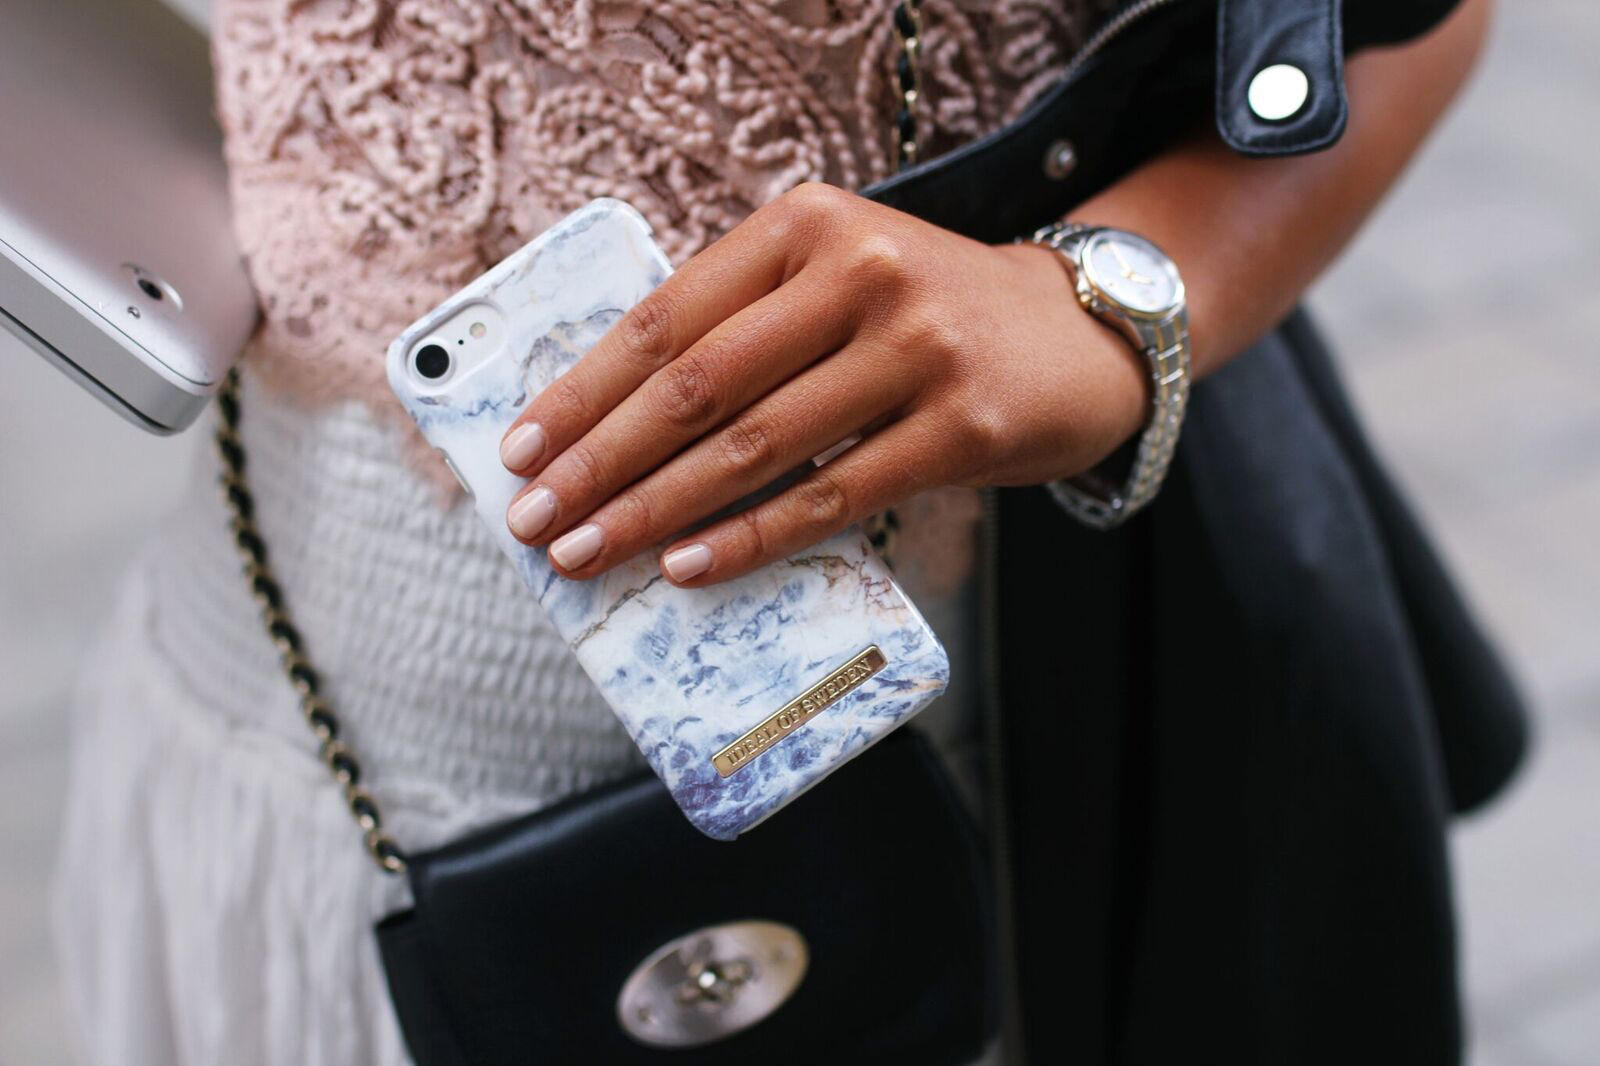 IDEAL OF SWEDEN Fashion, 6, iPhone iPhone iPhone Ocean 7, Marble 8, Apple, Backcover